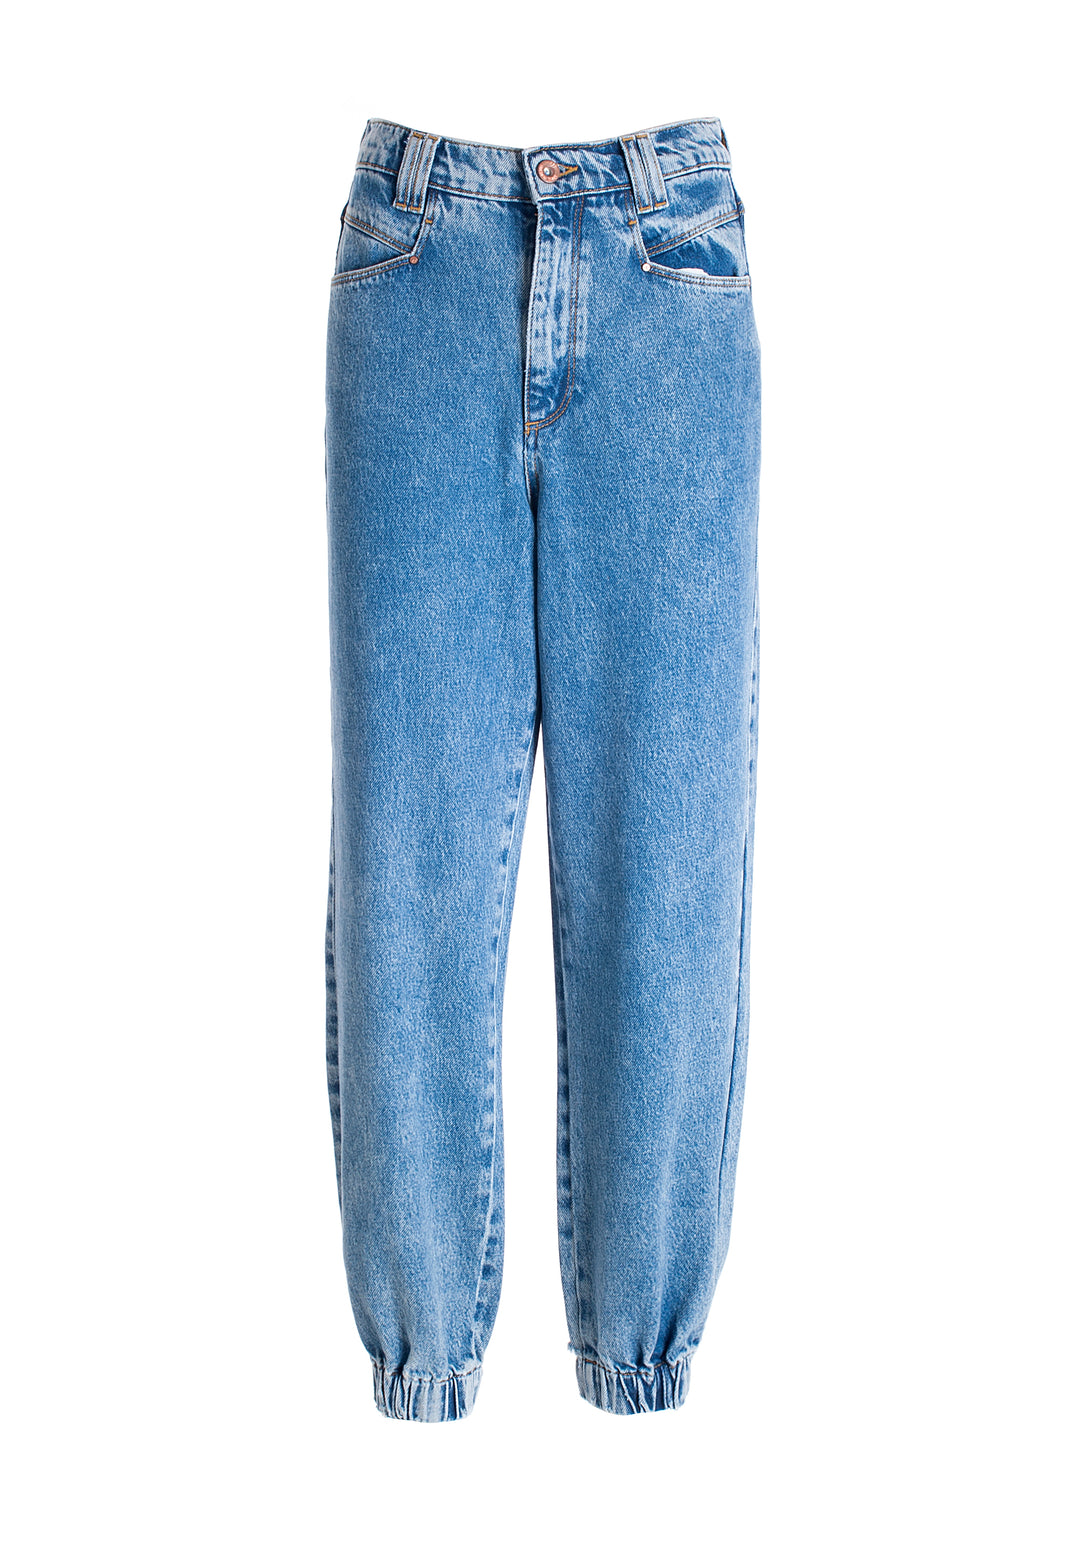 Carrot jeans made in denim with bleached wash